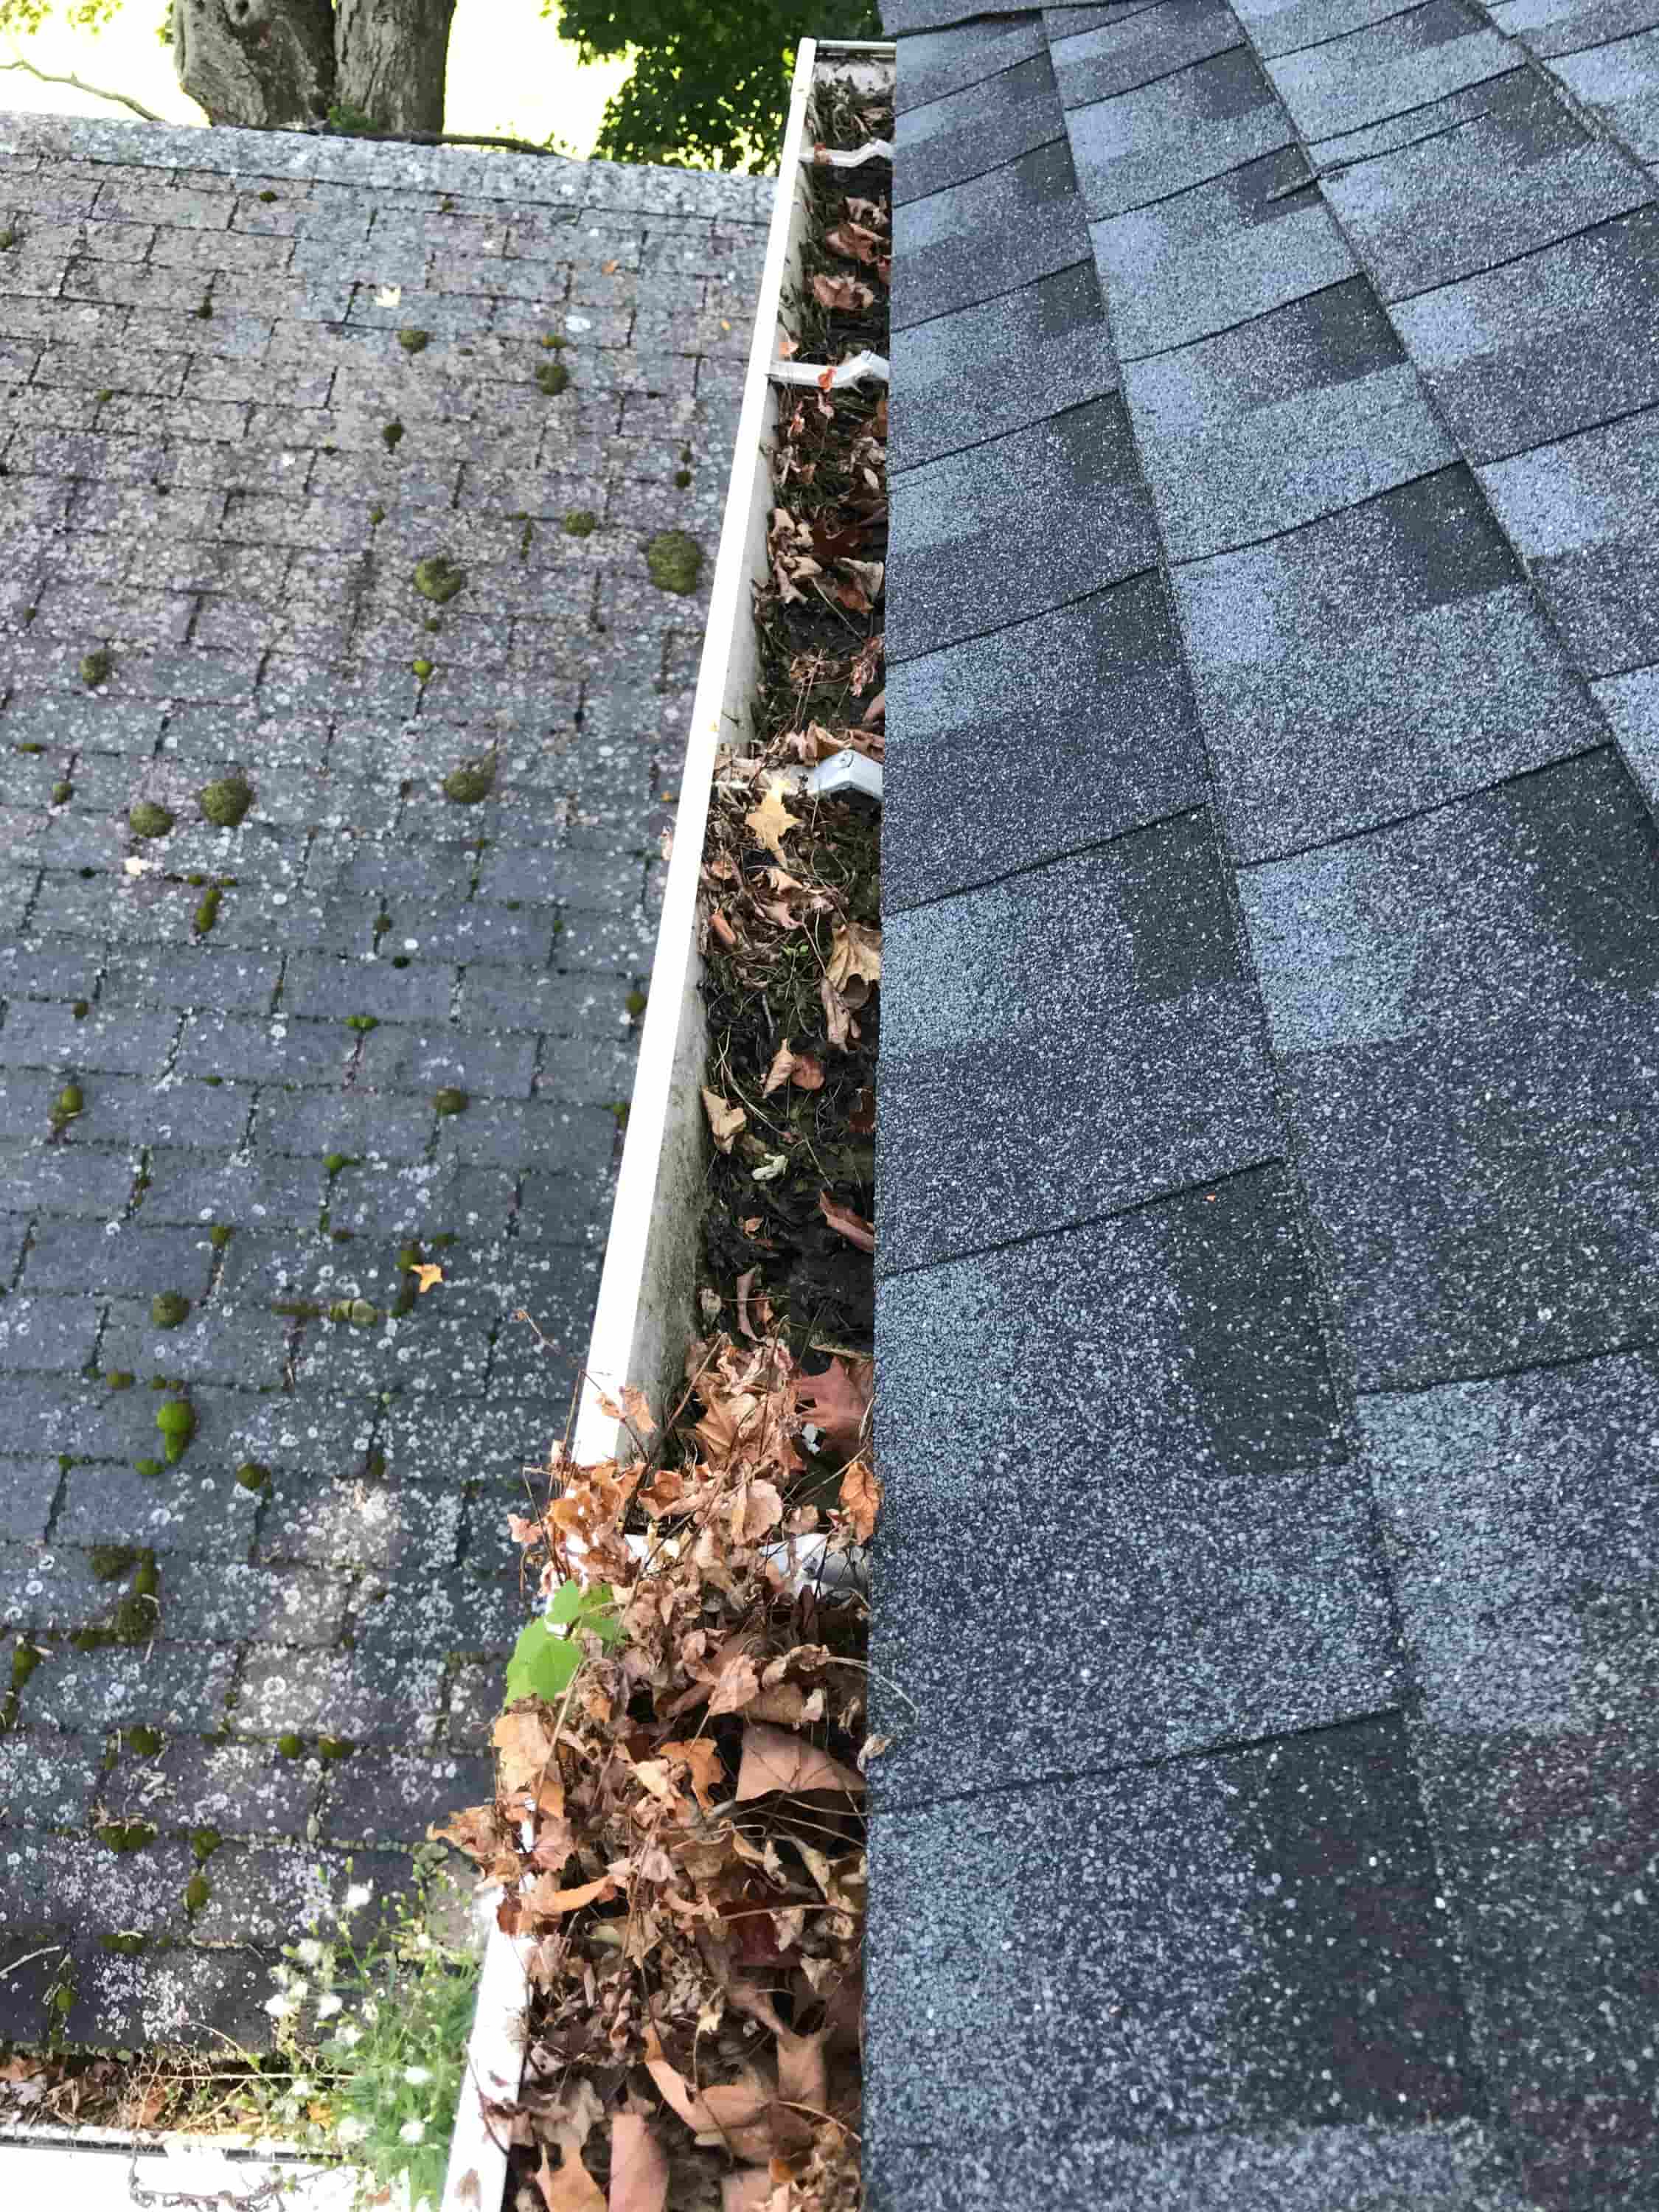 need gutters cleaned